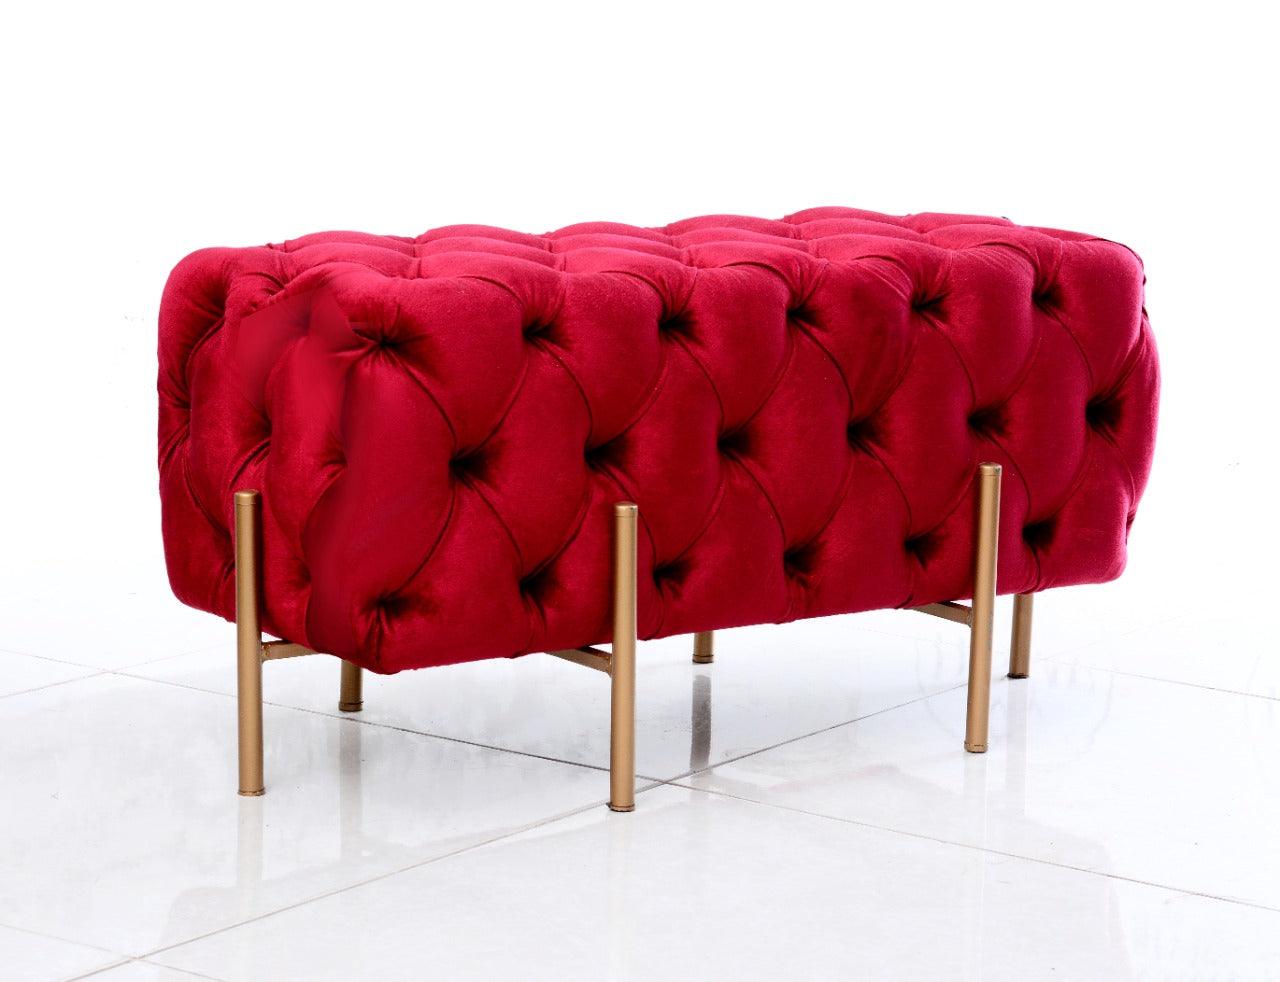 2 Seater Luxury Ottoman Wooden Stool With Steel Stand 719 - 92Bedding